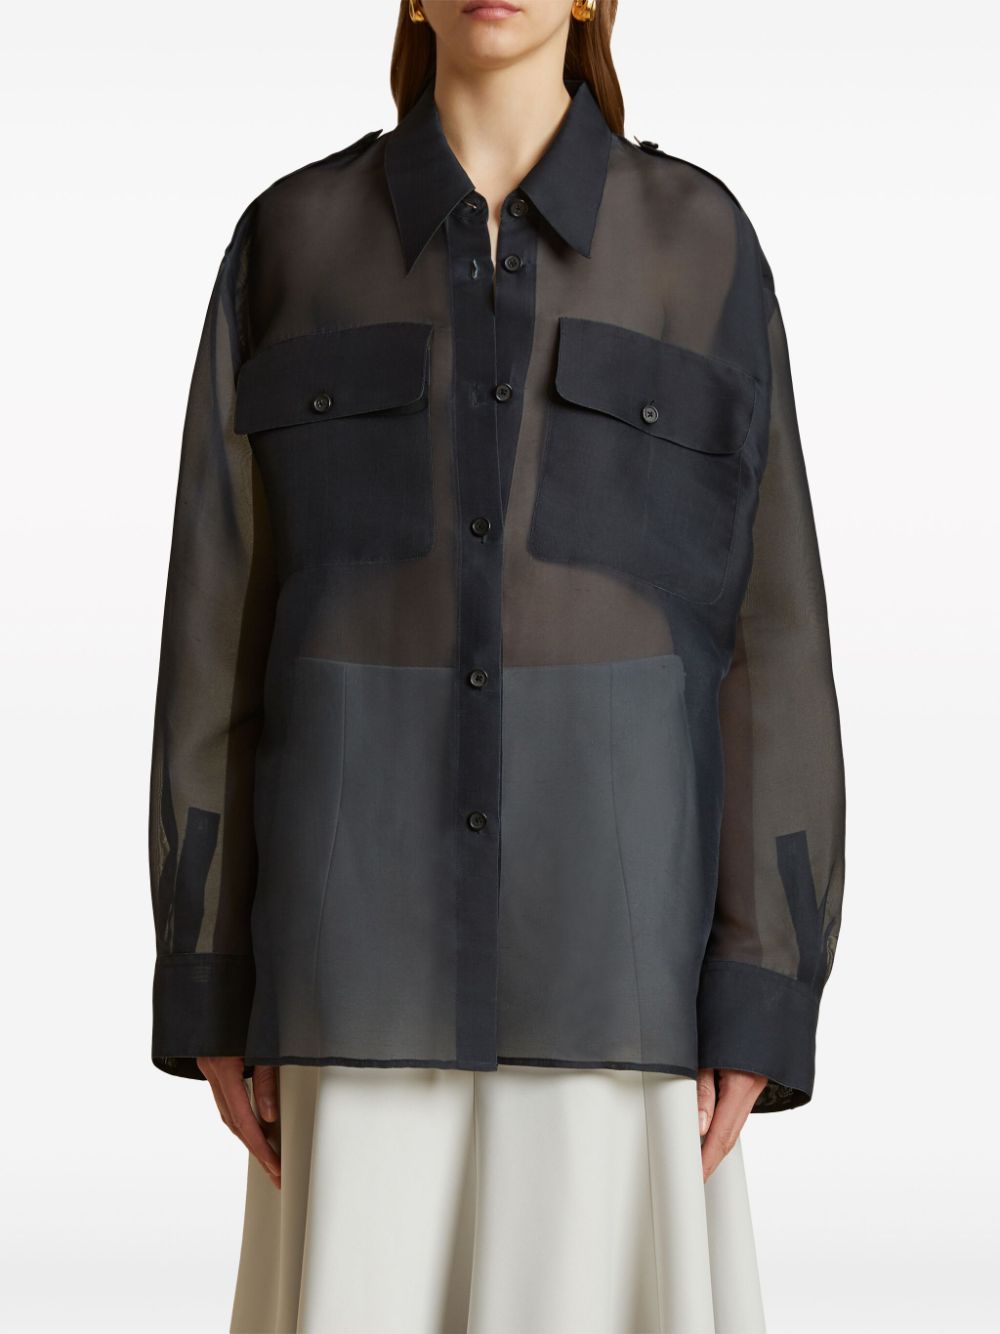 Semi-Sheer Black Silk Shirt with Epaulettes and Front Button Fastening